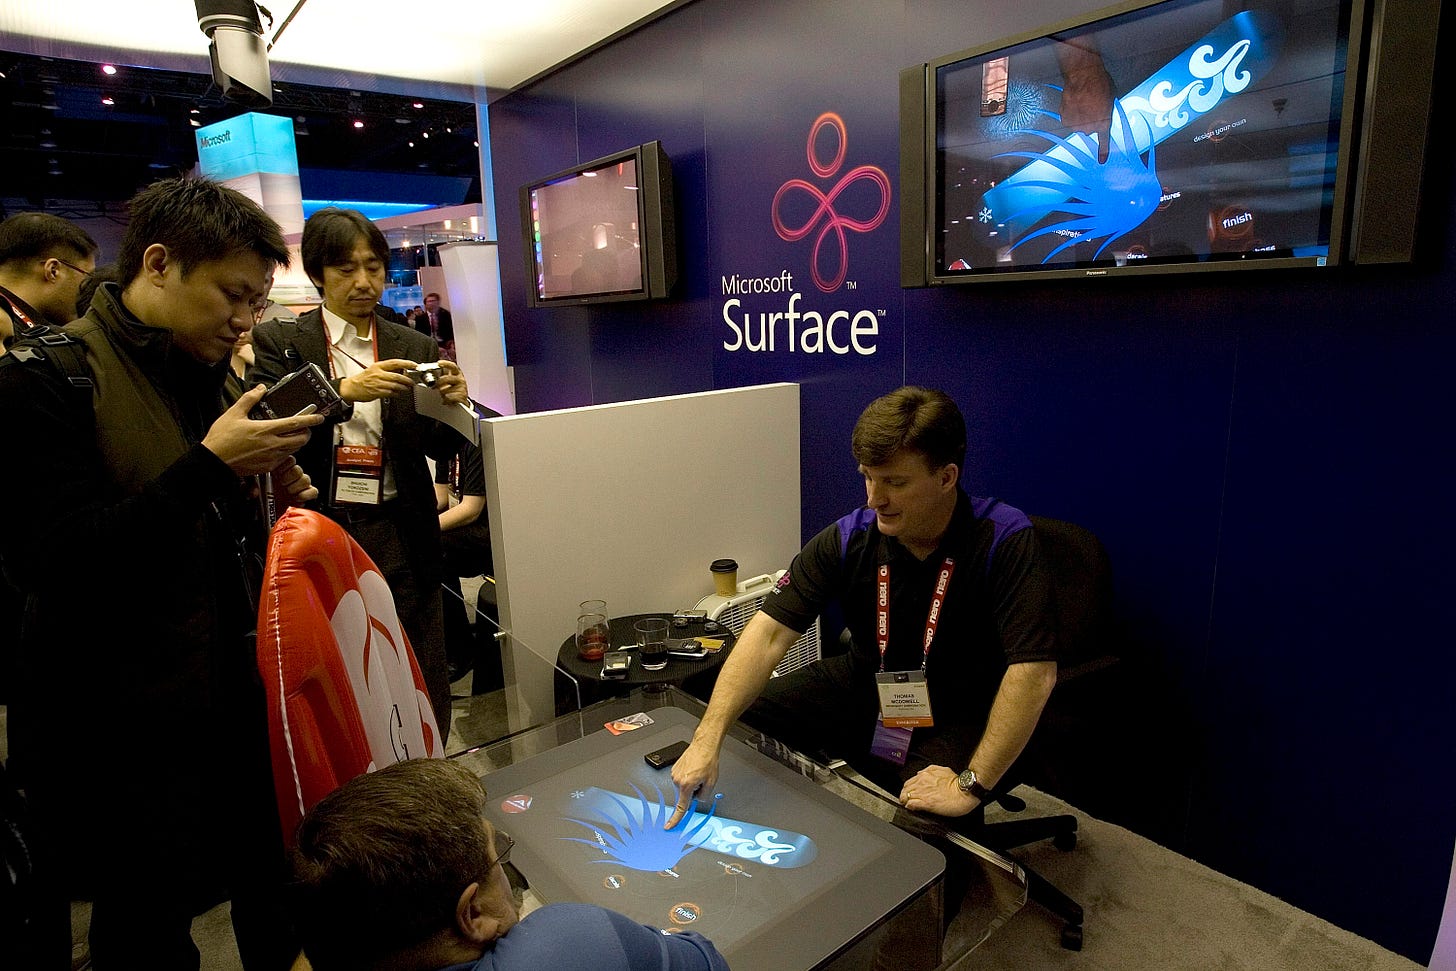 A Microsoft employee shows people the new Microsoft Surface at the 2008 International Consumer Electronics Show at the Las Vegas Convention Center January 9, 2008 in Las Vegas, Nevada. Surface is the Microsoft Vista-based platform that was formerly named "PlayTable." The first commercial implementations of Surface systems are expected to be deployed by hotels, casinos and cell-phone retailers in Spring 2008. CES, the world's largest annual consumer technology tradeshow, runs through tomorrow and features 2,700 exhibitors showing off their latest products and services to more than 140,000 attendees